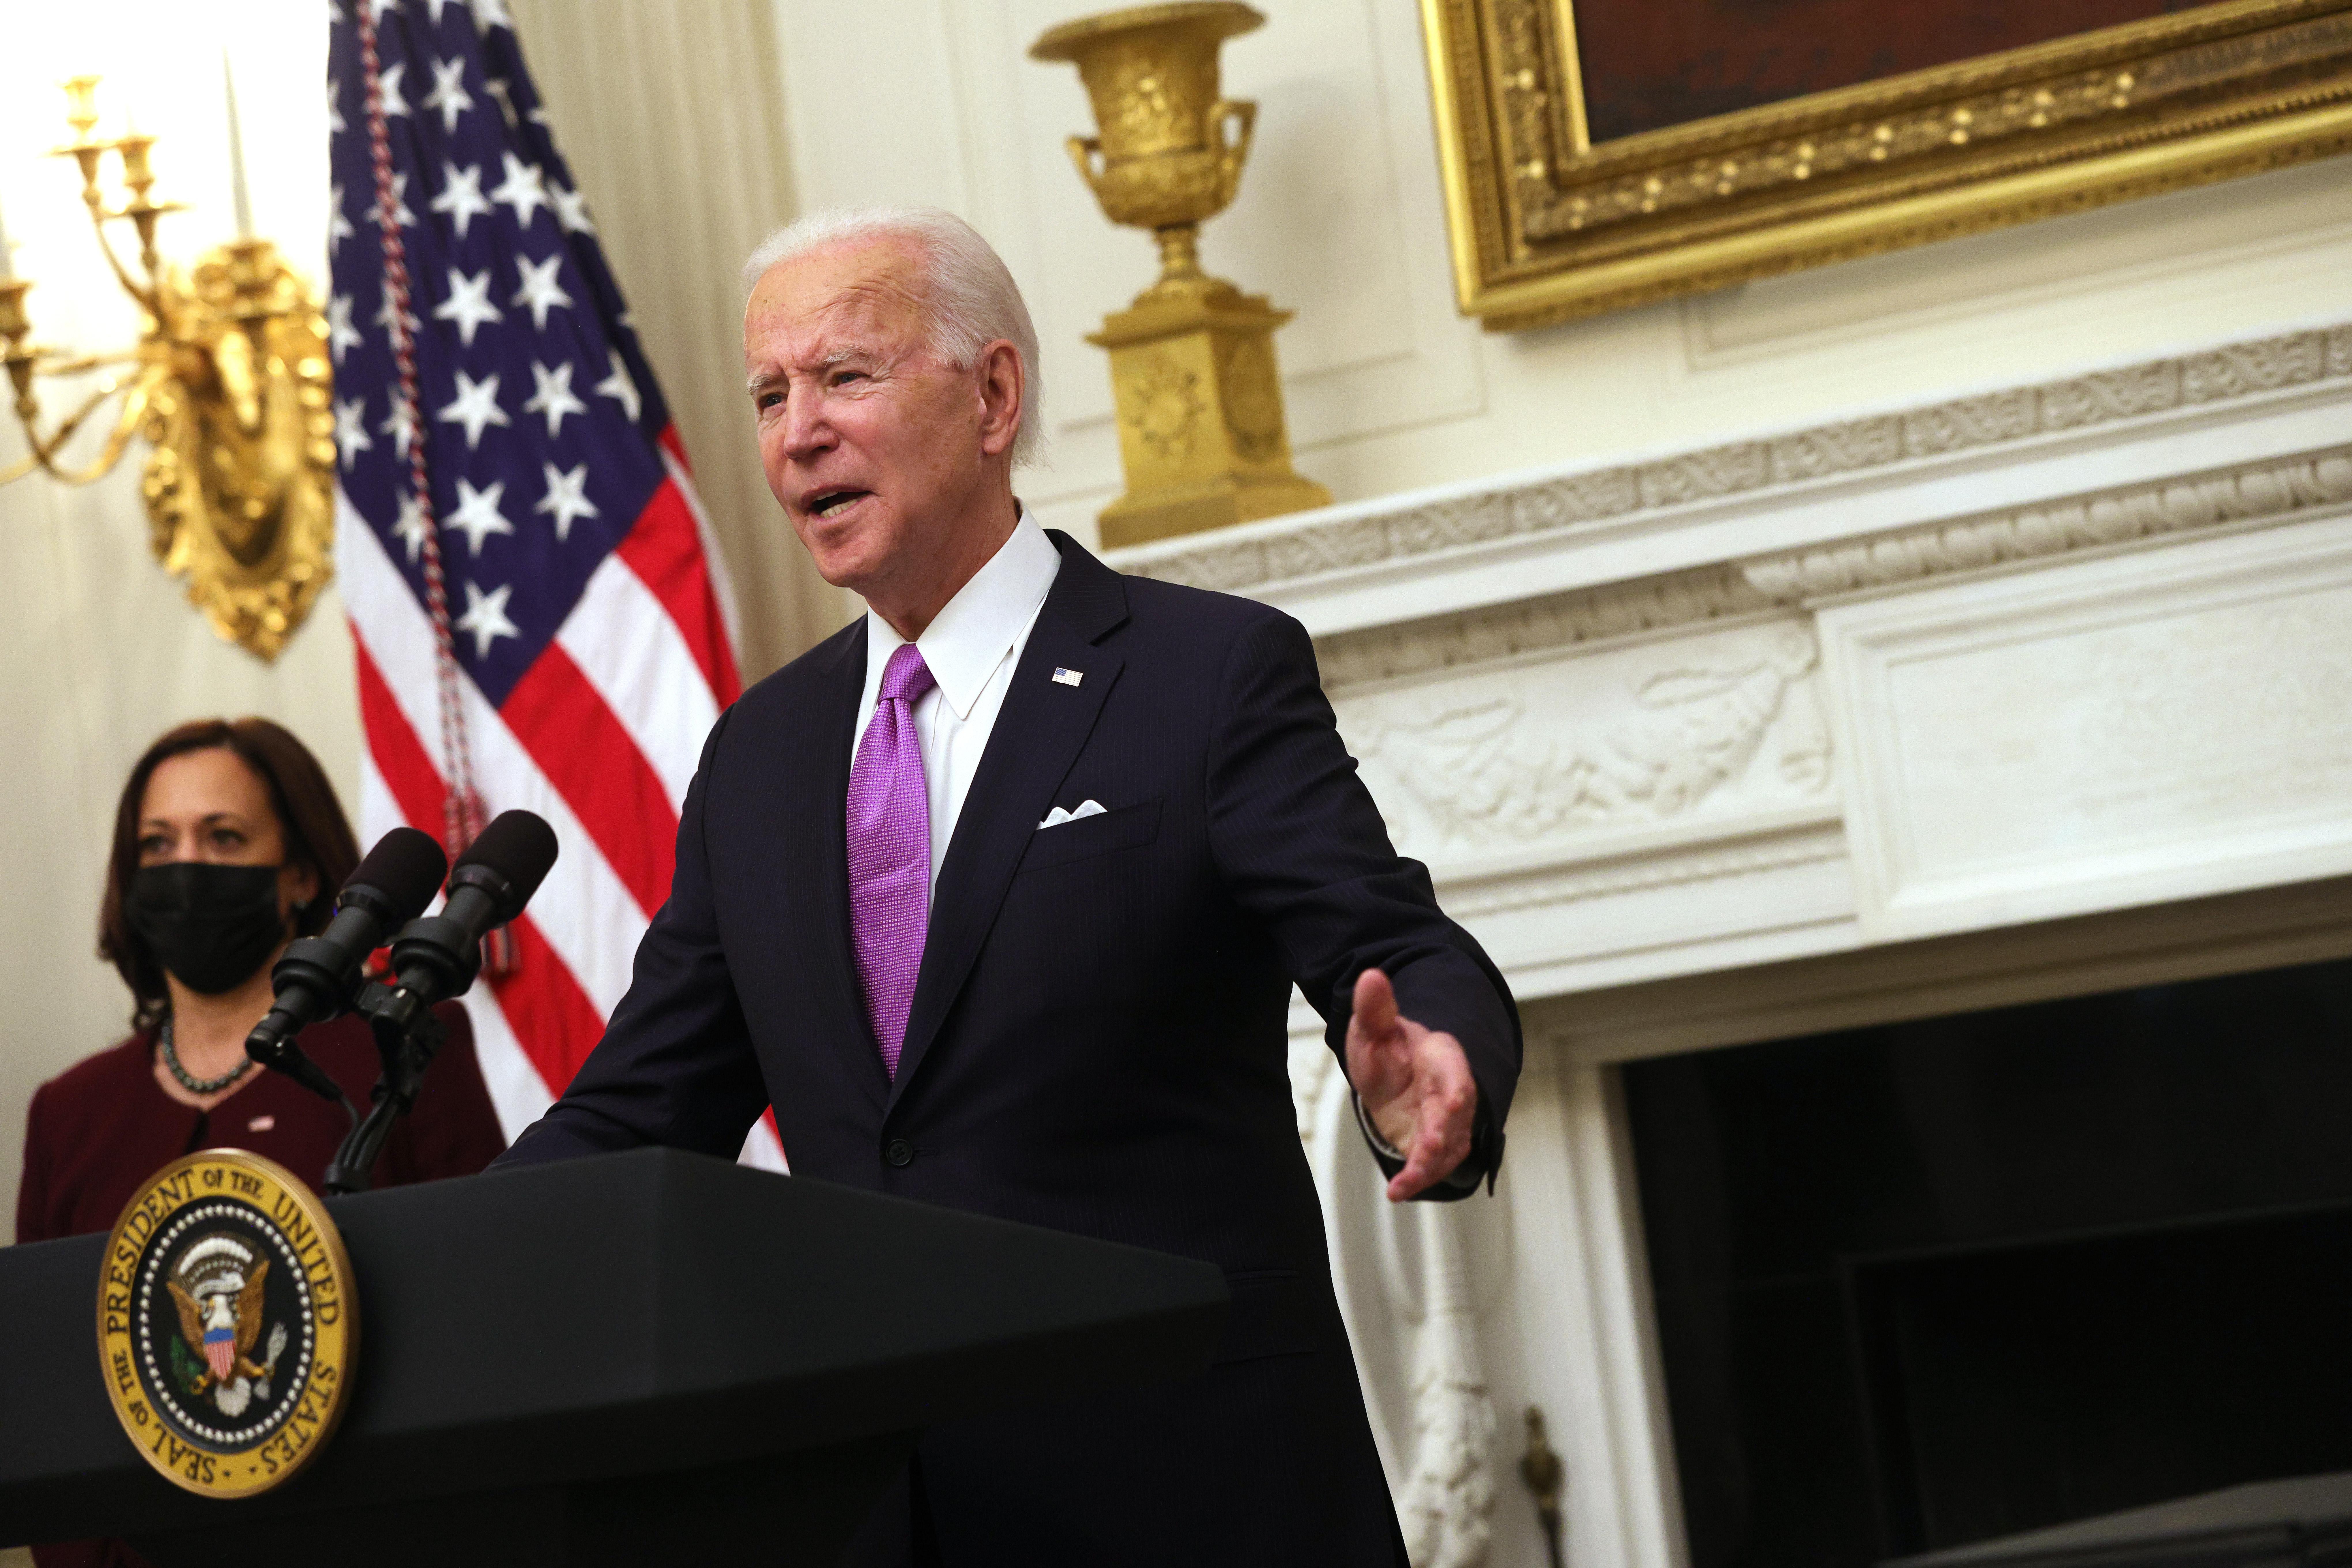 Biden raises his arms as he speaks at a podium in the State Dining Room of the White House. Vice President Kamala Harris looks on behind him.